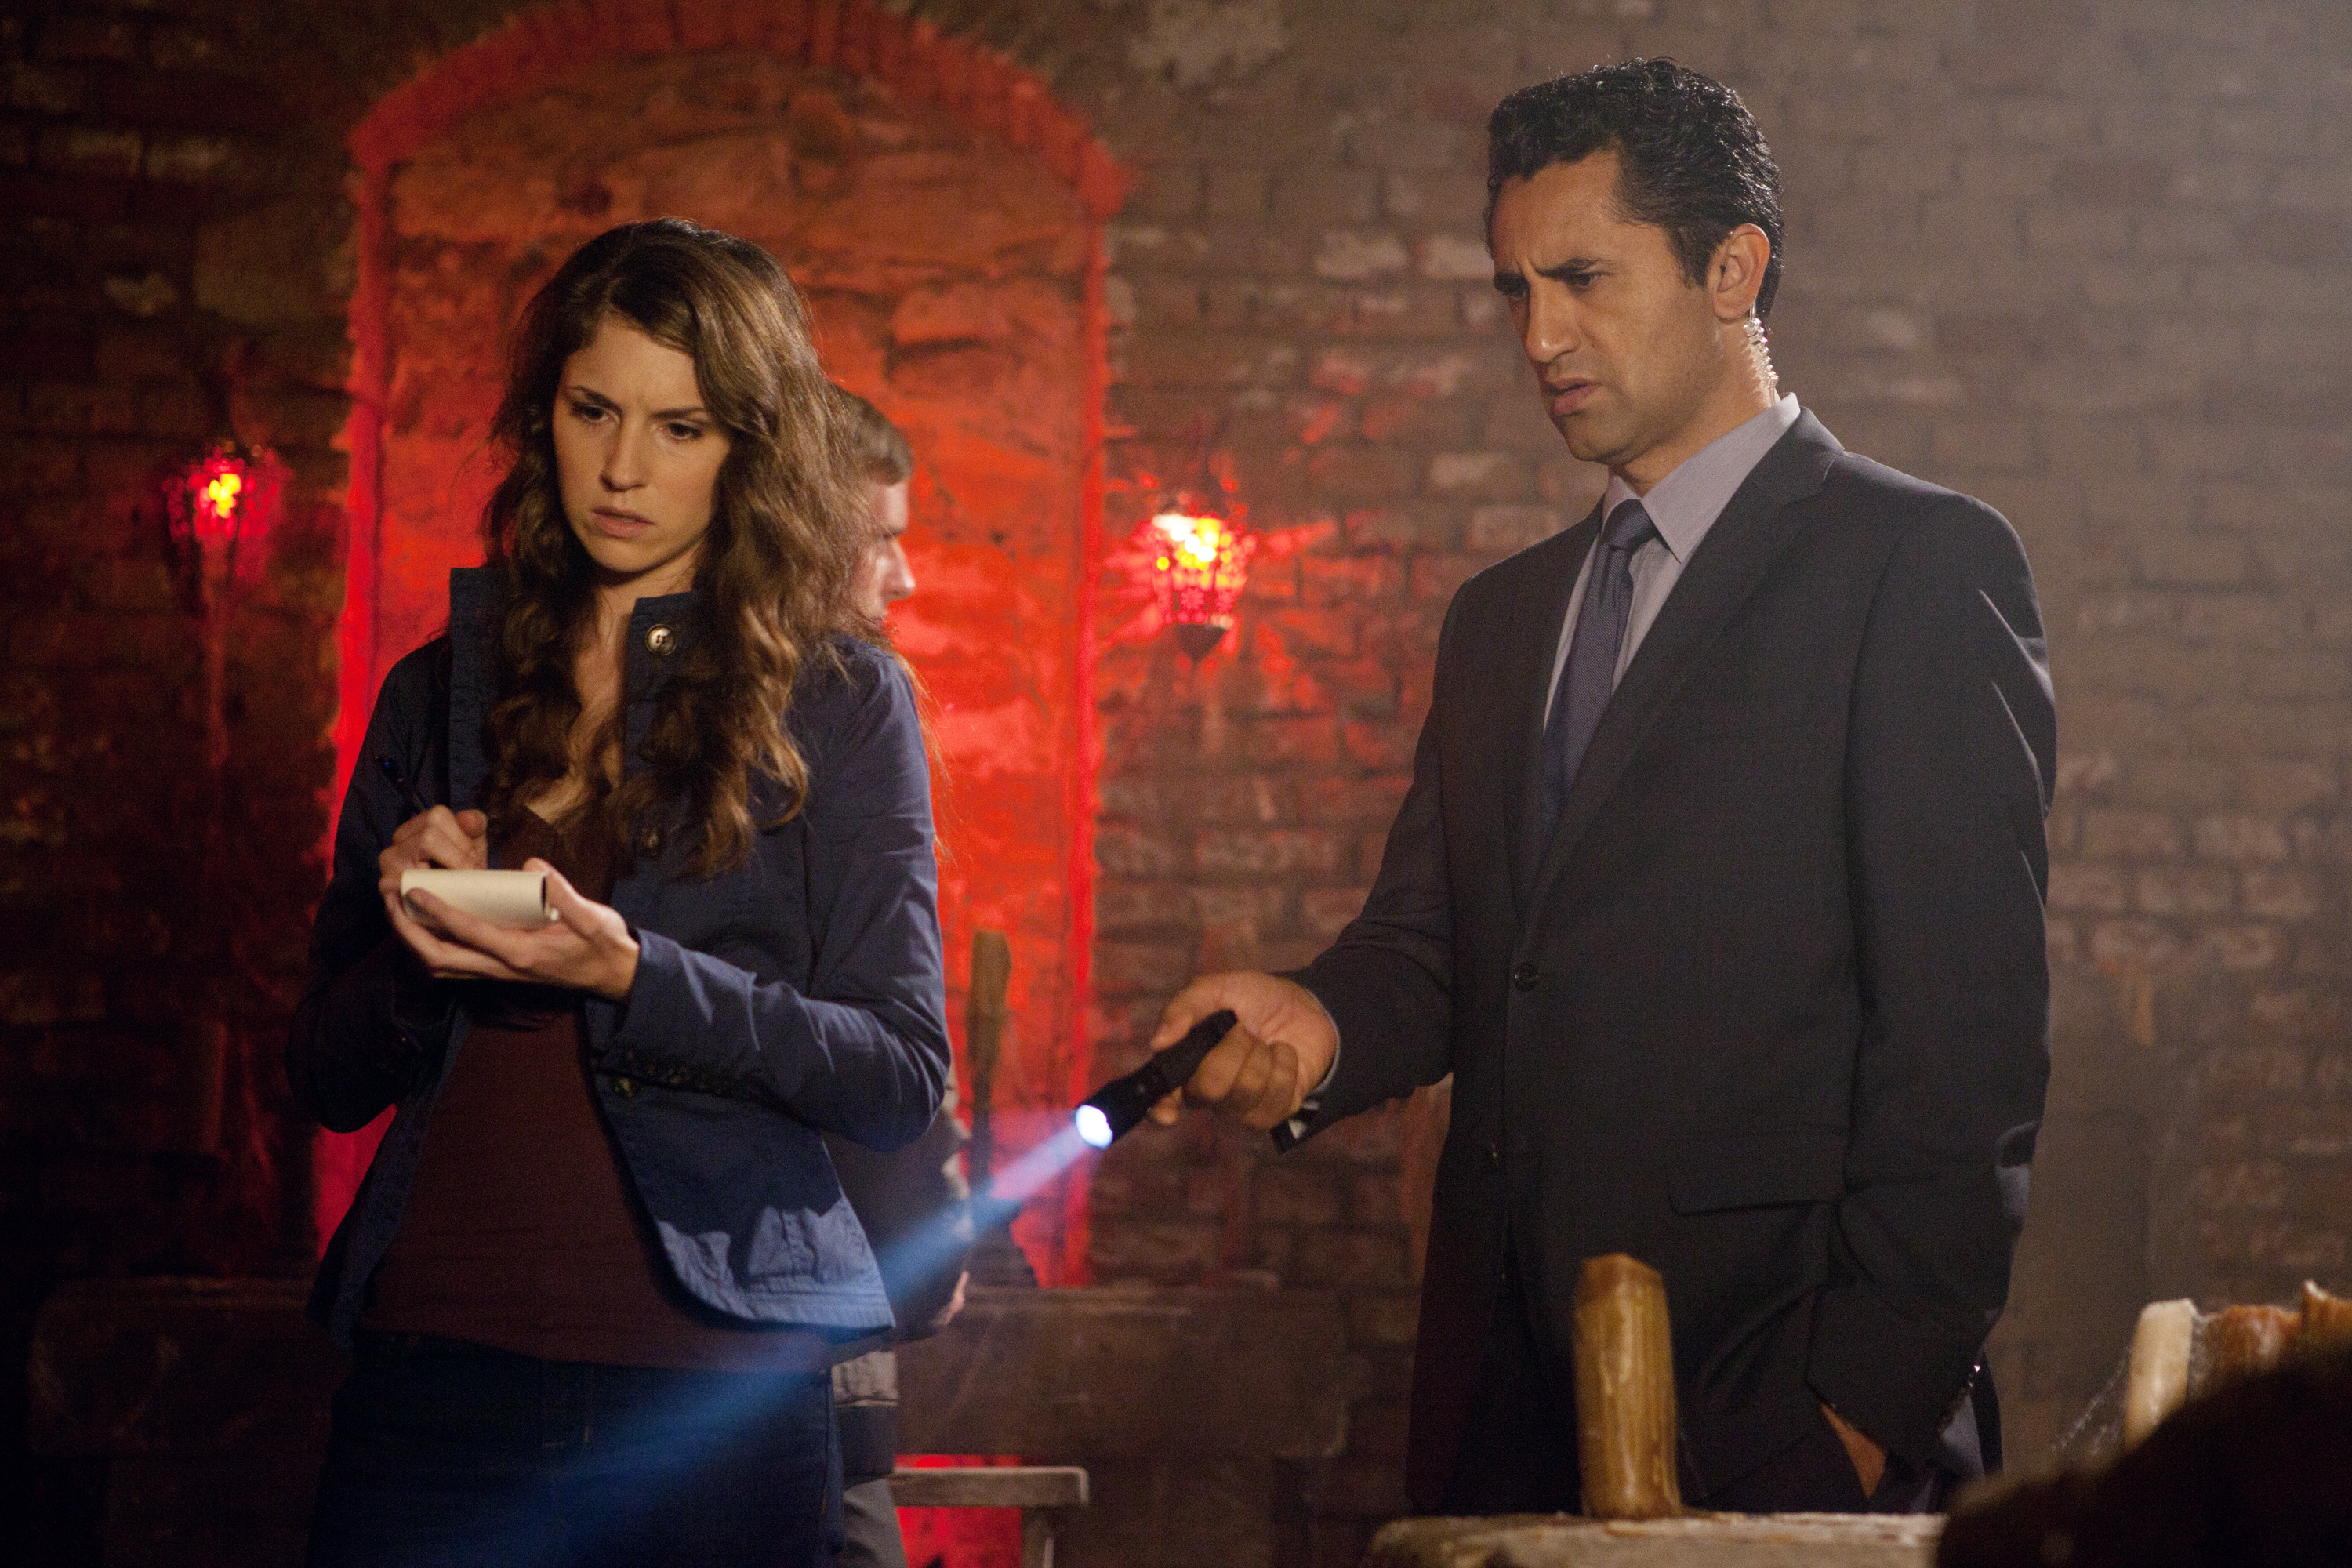 Jessica Boone as Rabia with Cliff Curtis as Dax Miller in the ABC-tv thriller MISSING starring Ashley Judd & Sean Bean.